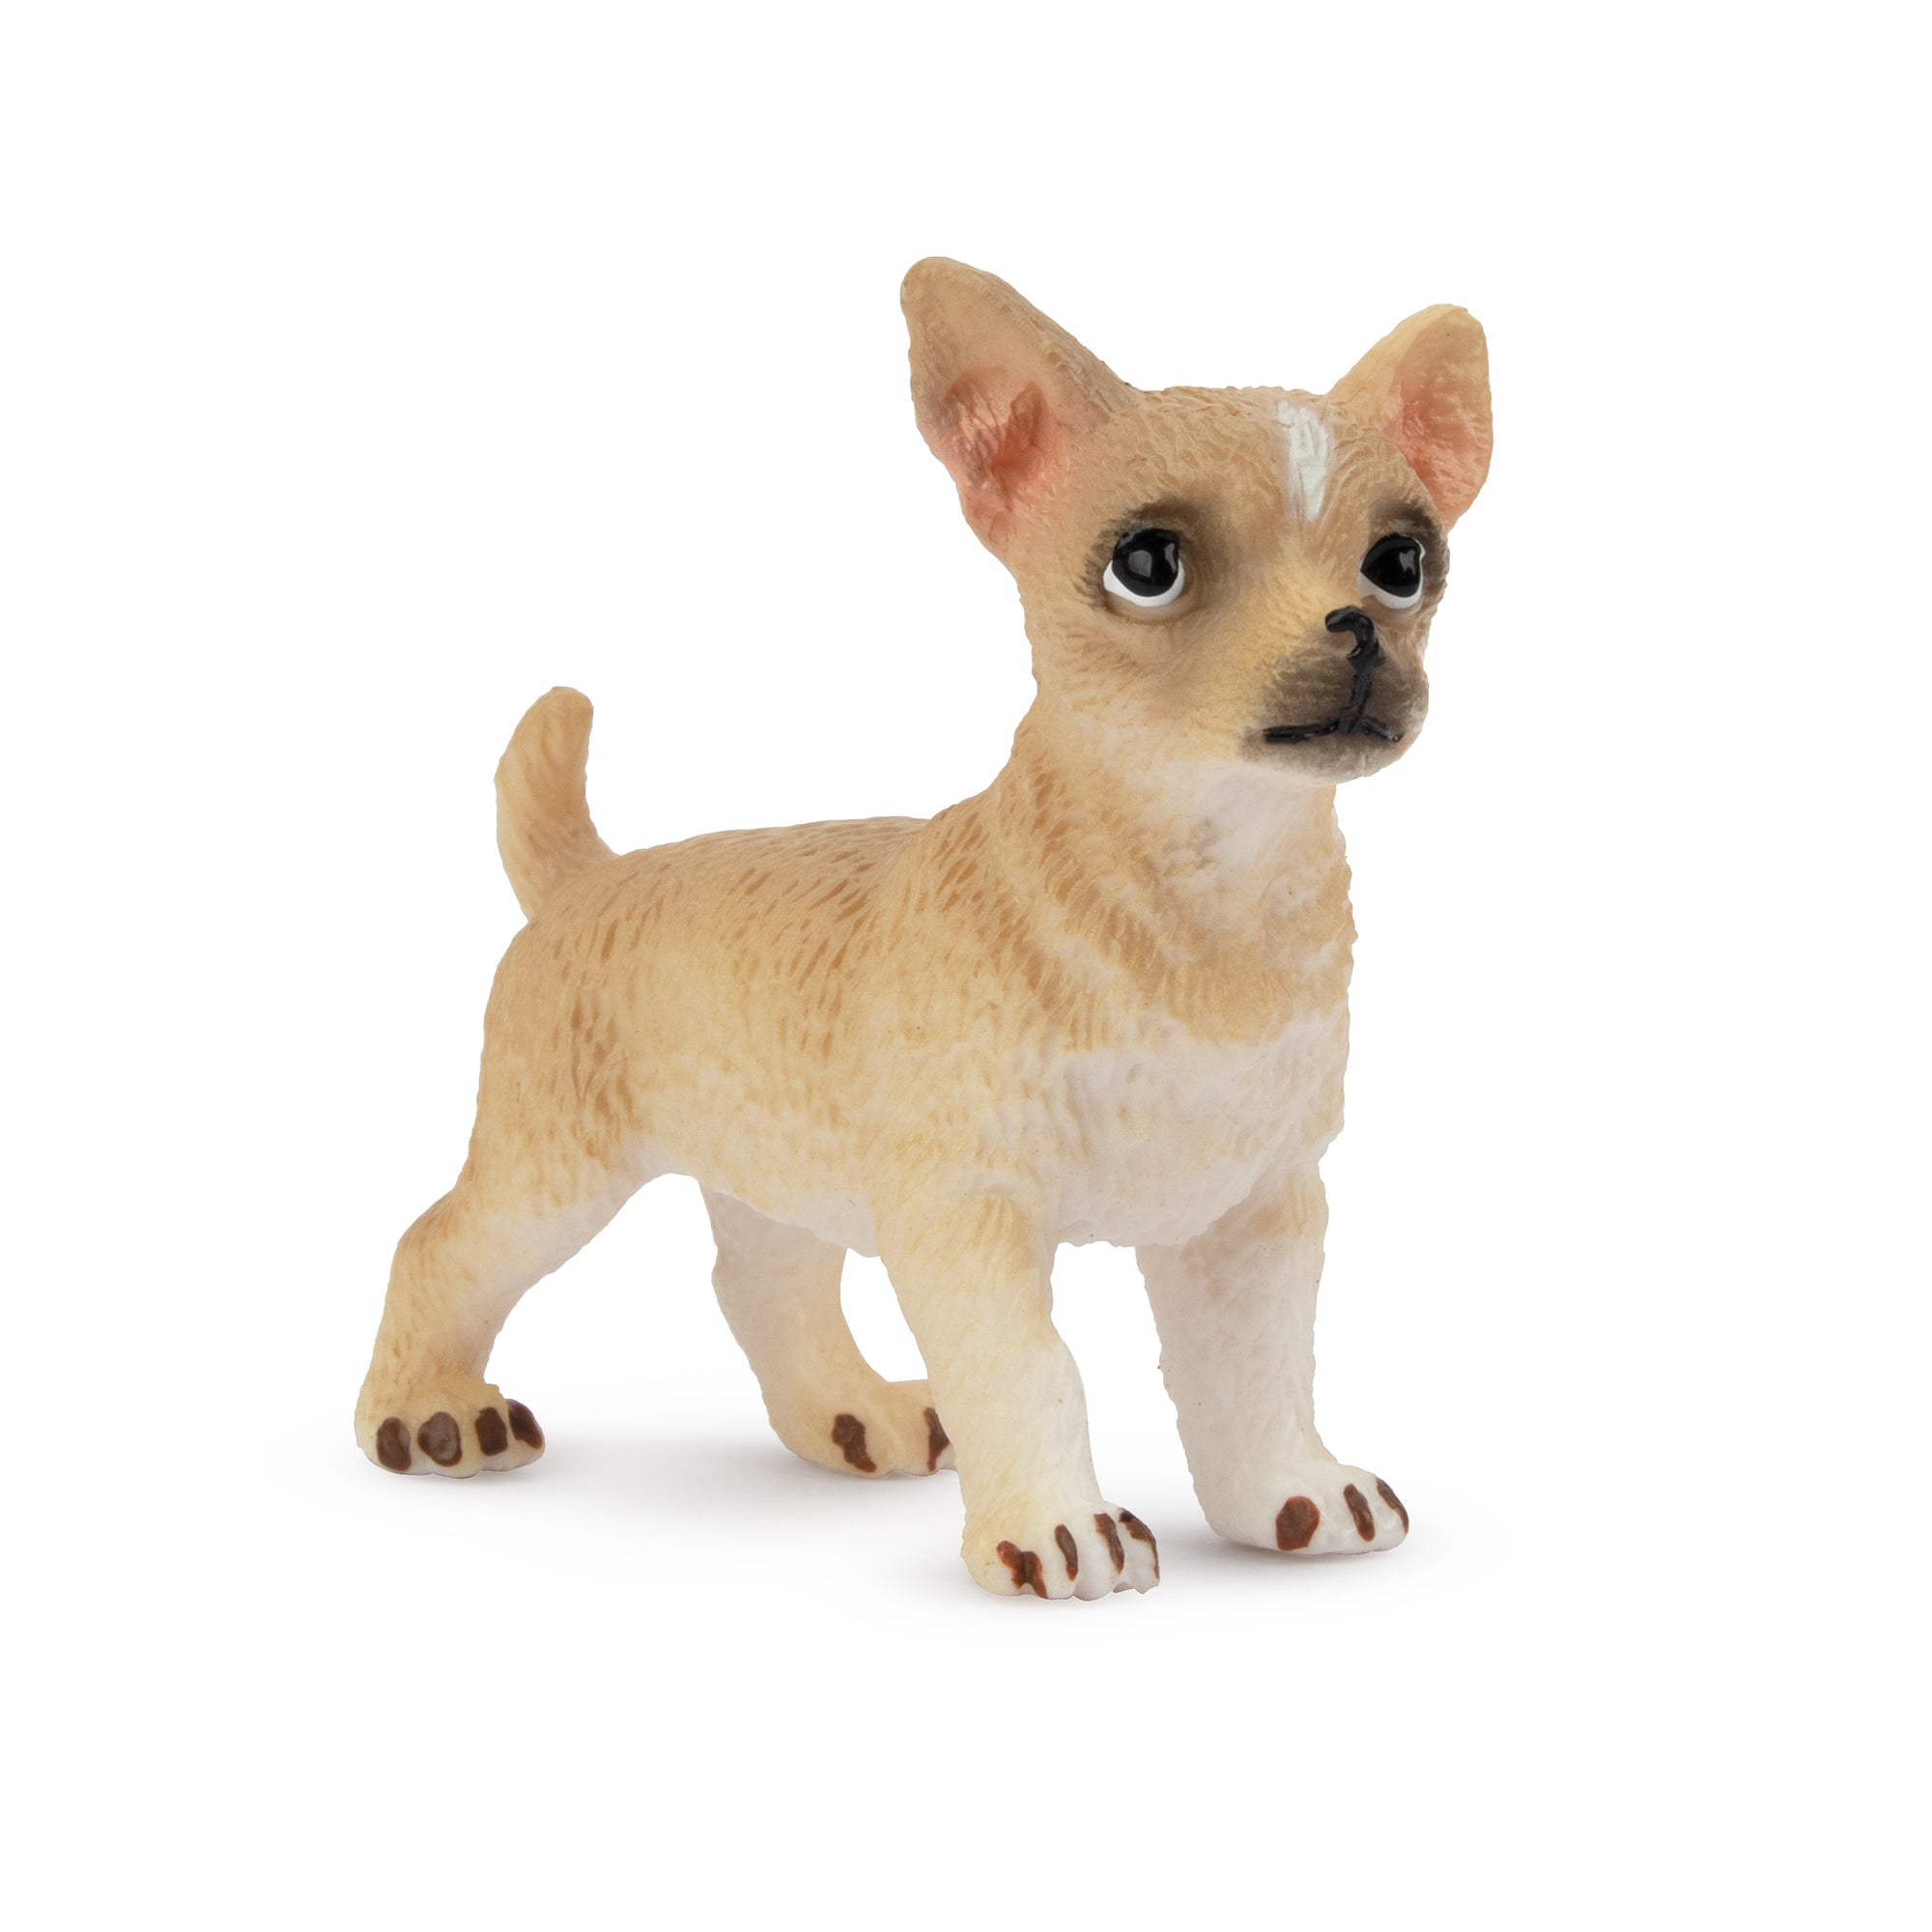 Toymany Mini Standing Fawn Chihuahua Puppy Figurine Toy